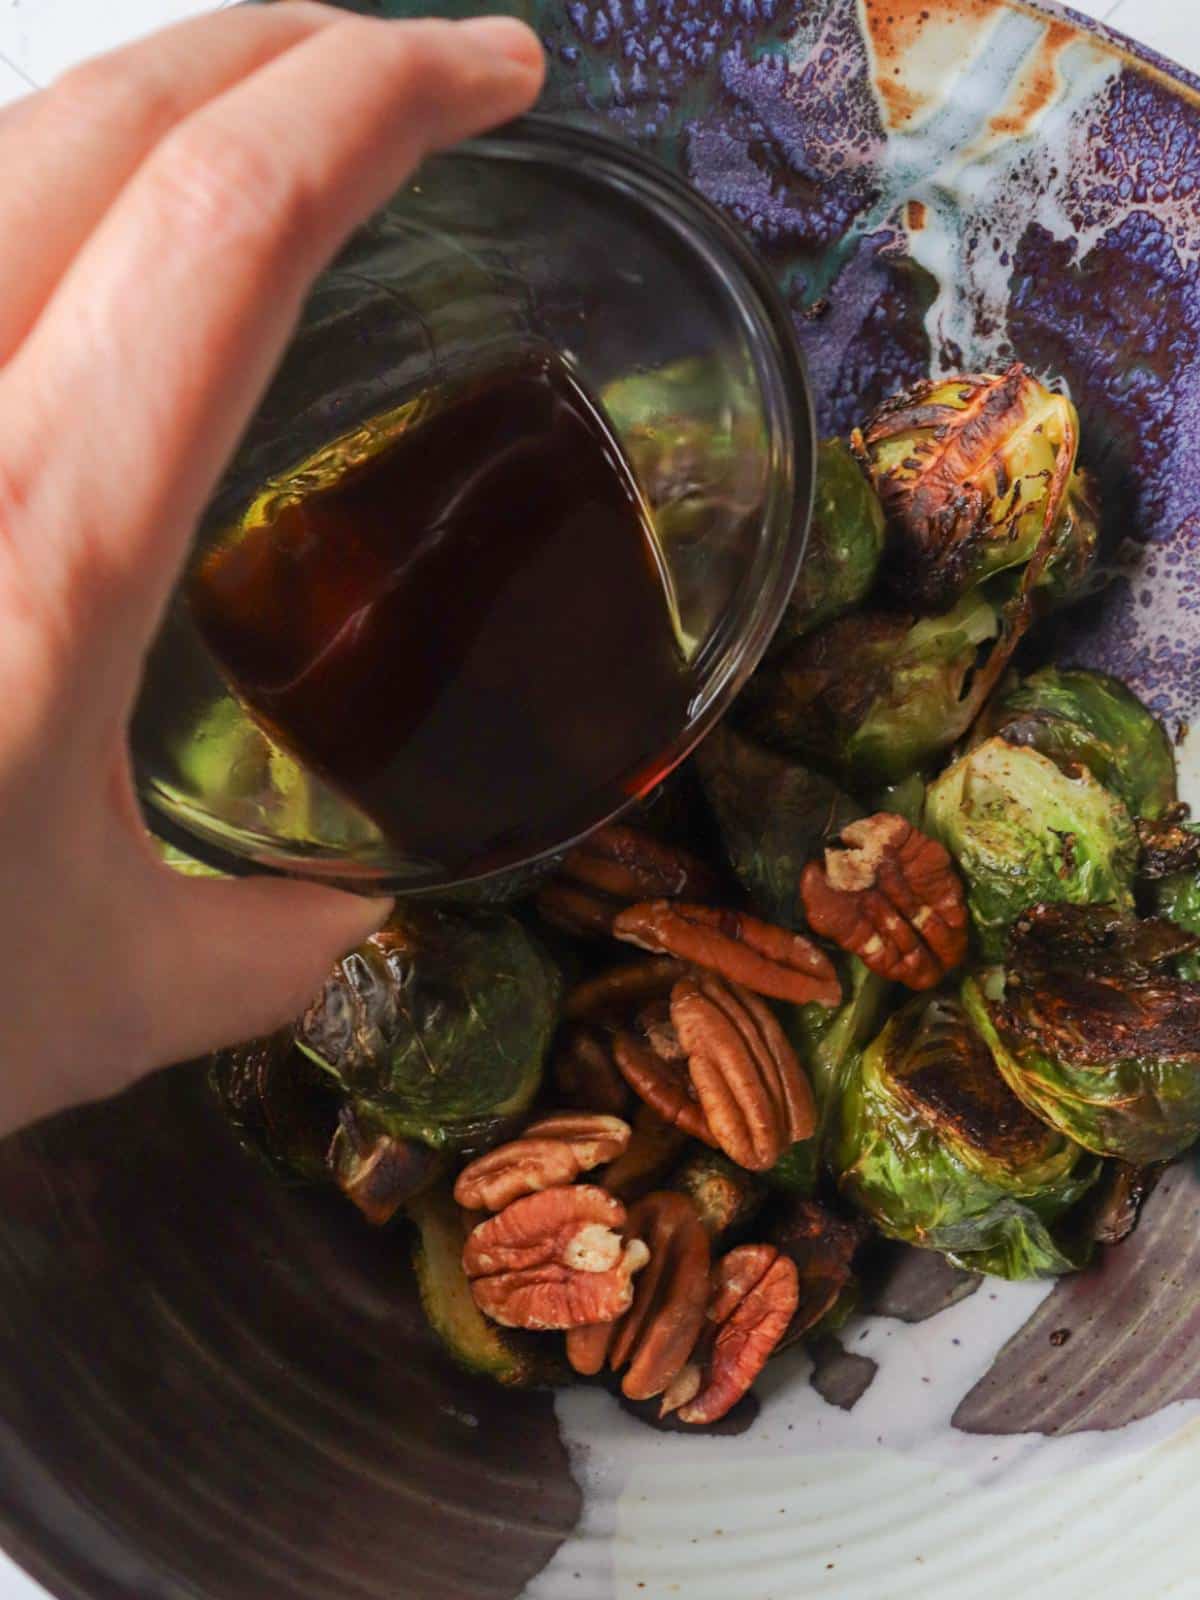 A hand pouring maple balsamic glaze over roasted brussel sprouts after being roasted.